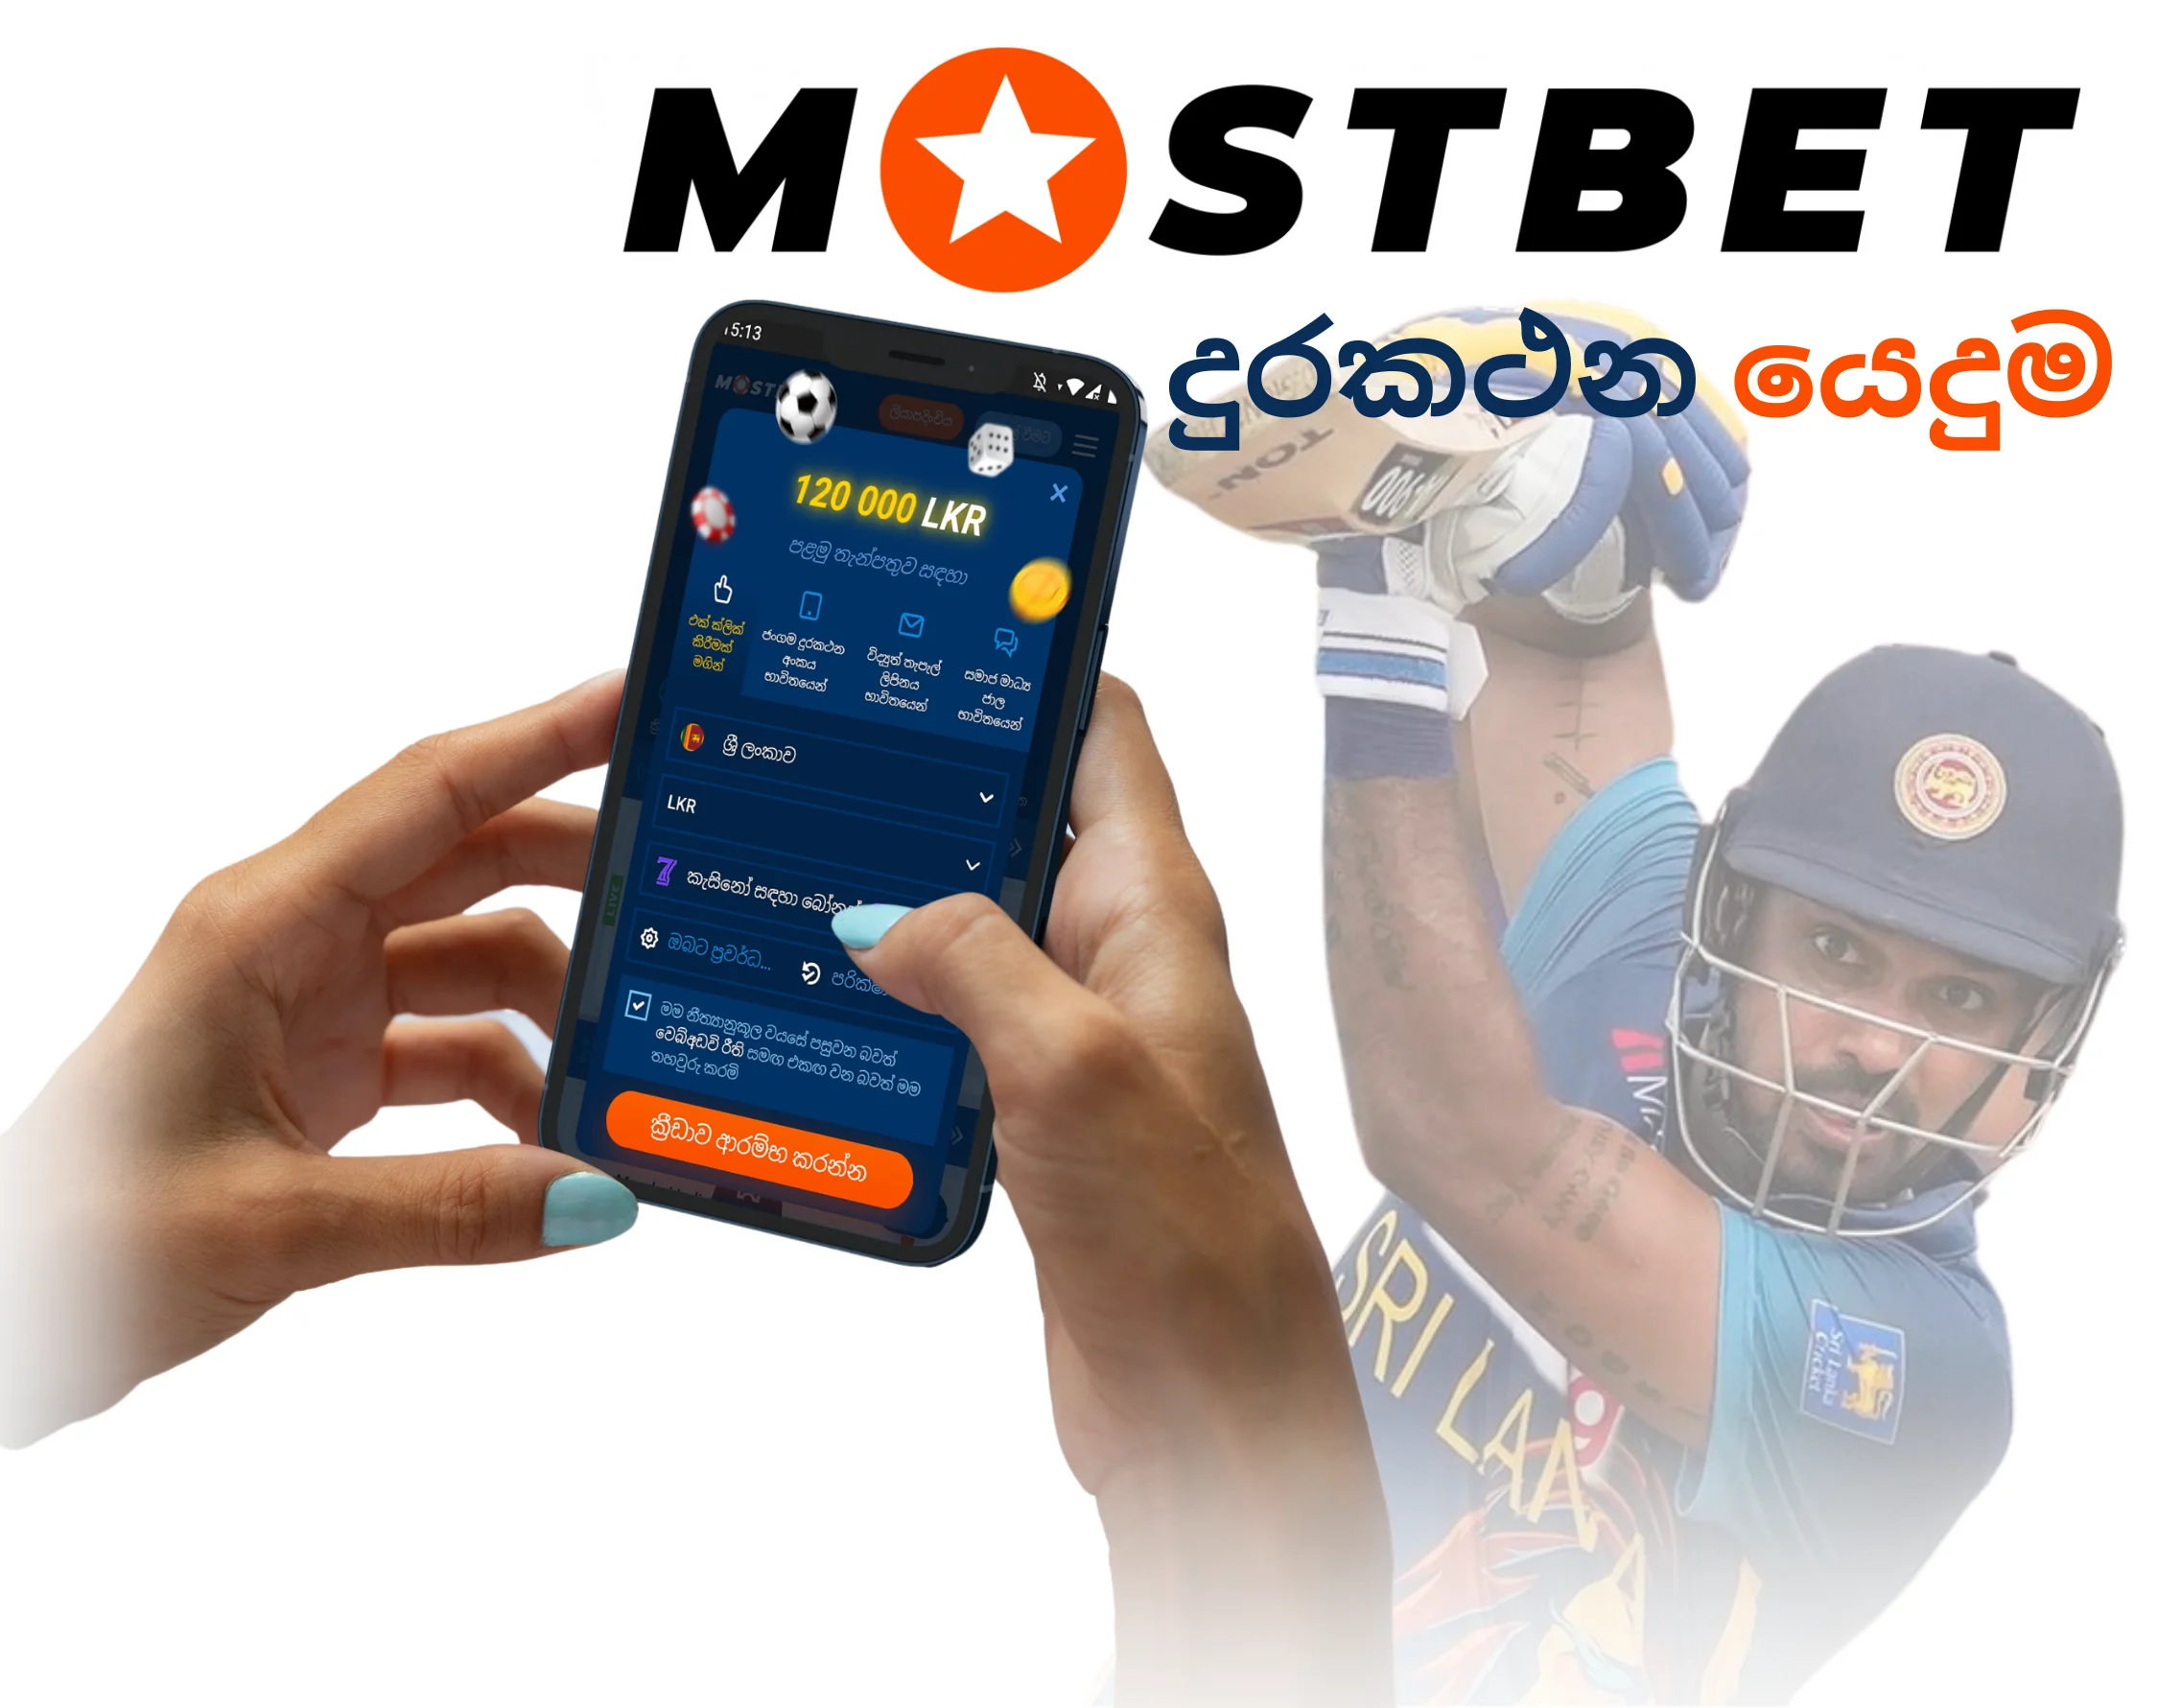 Mostbet bookmaker and casino company in Bangladesh Experiment: Good or Bad?